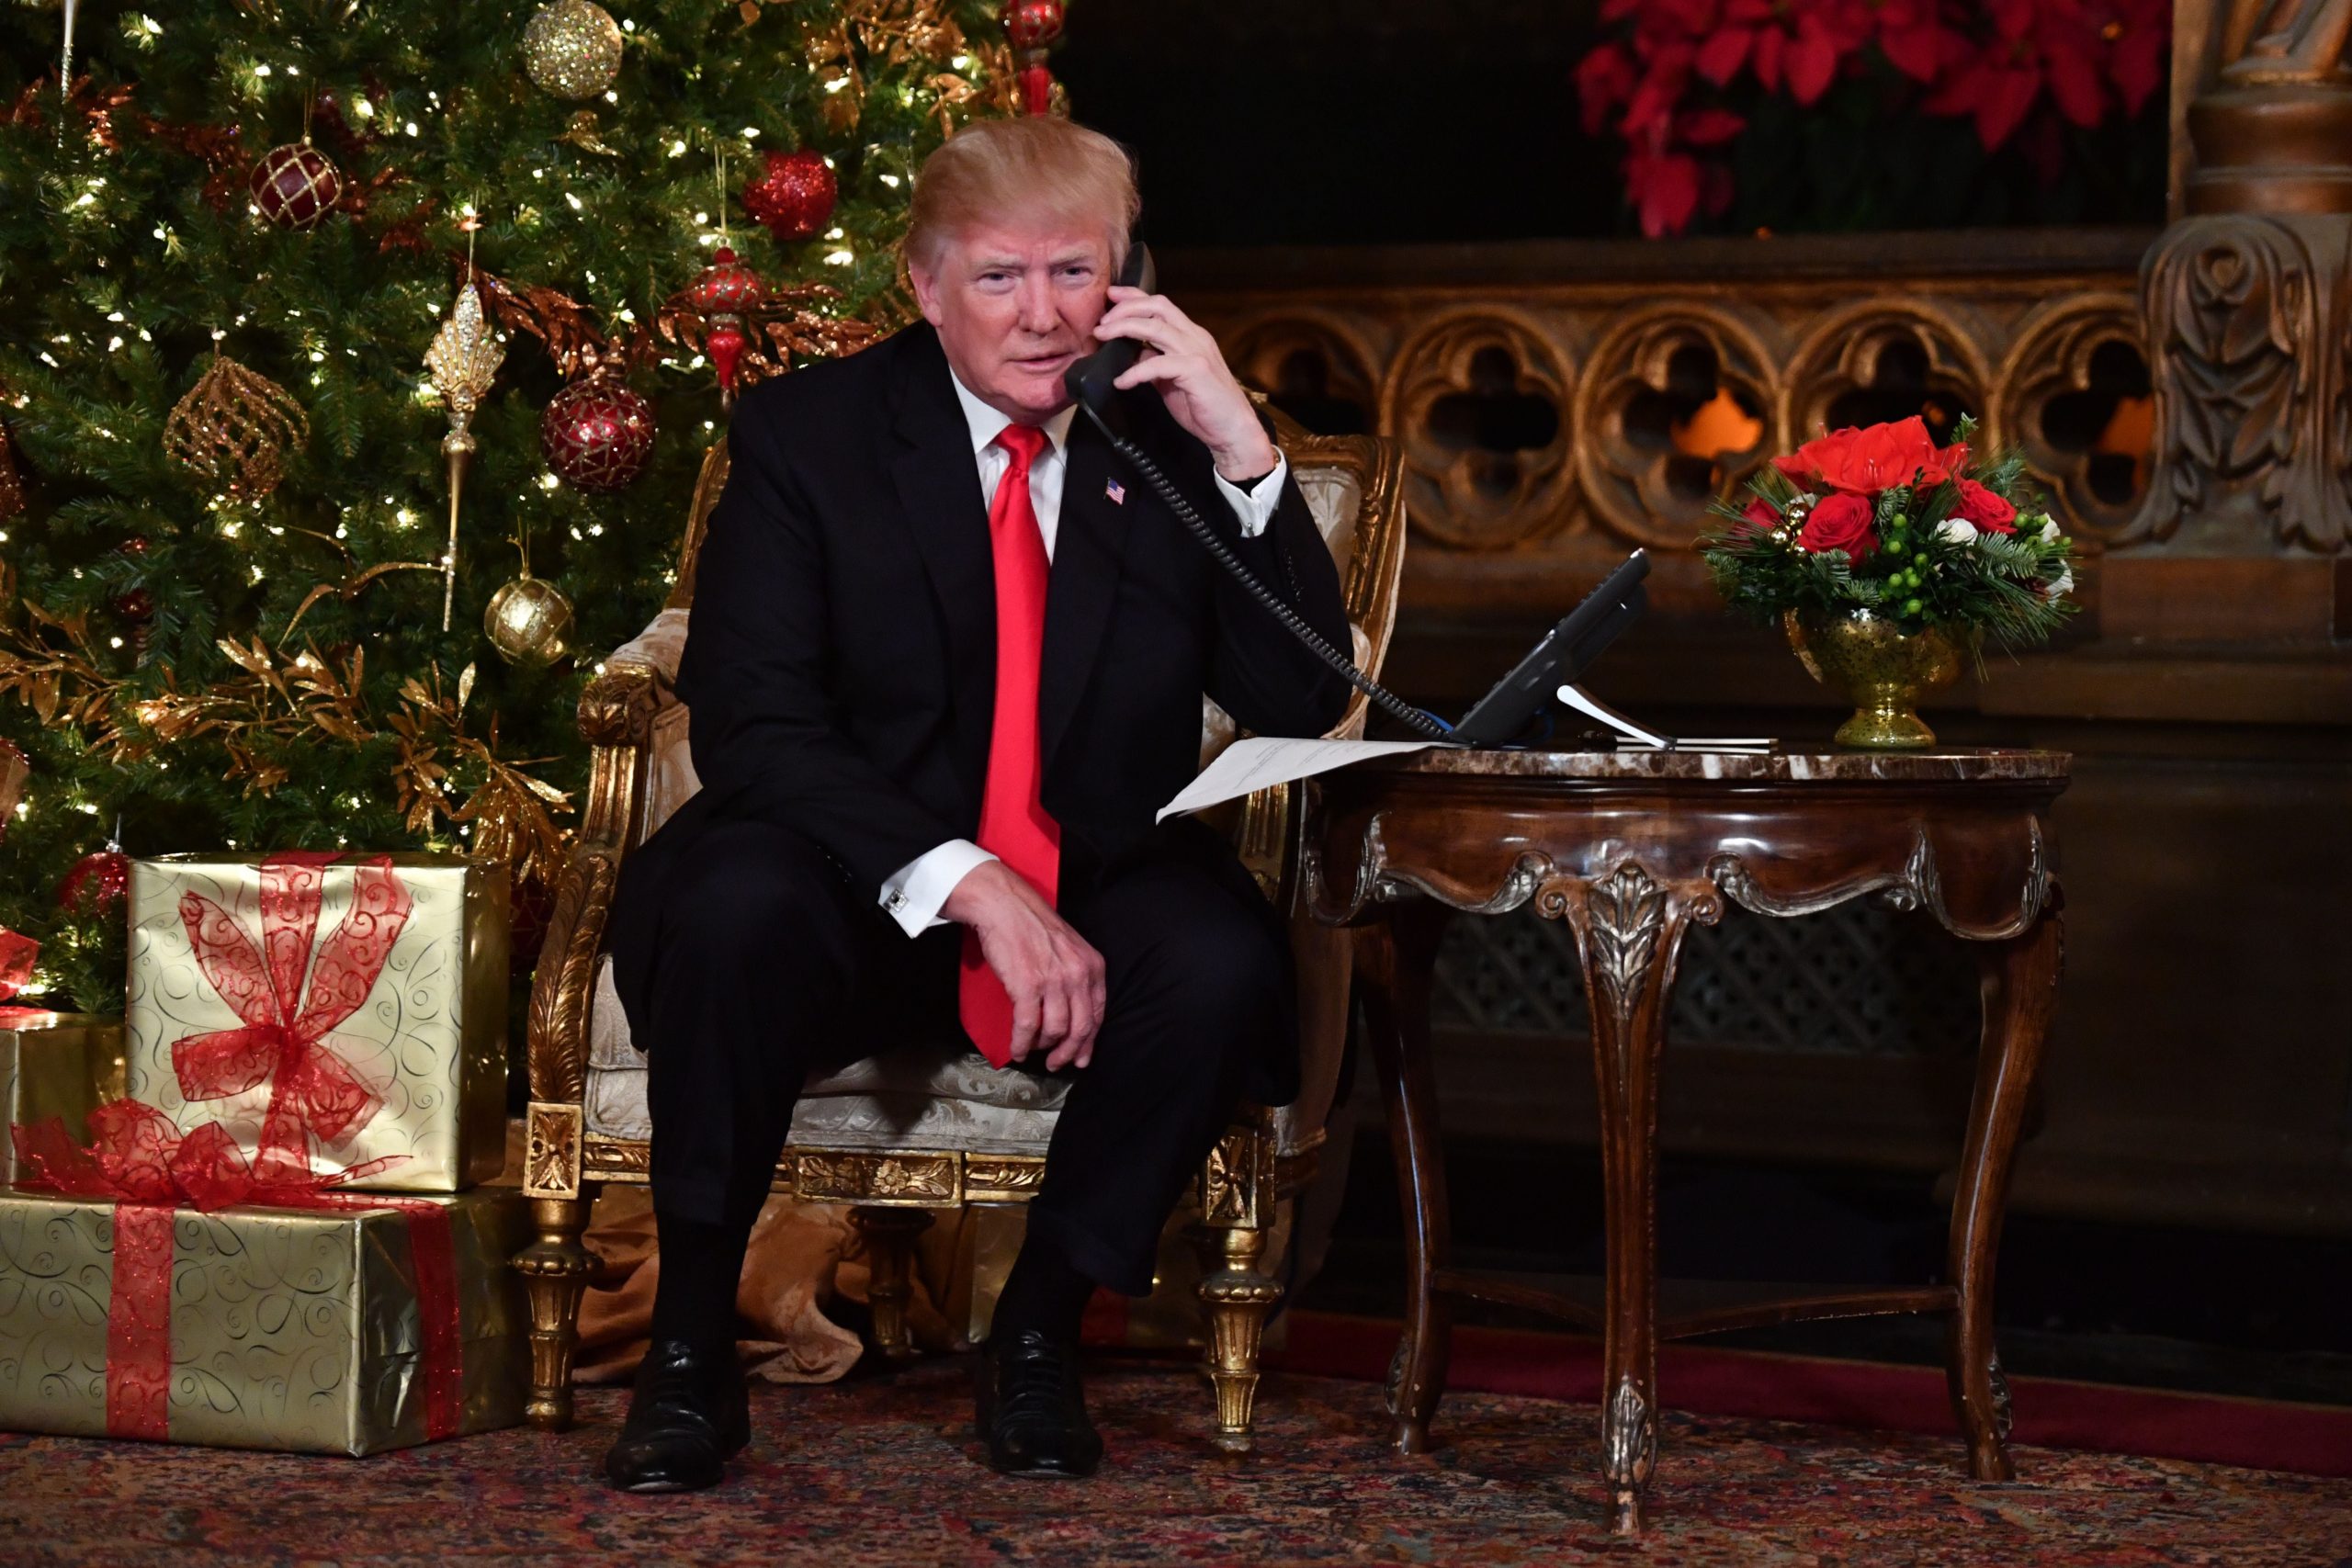 Trump gives Christmas Eve to federal employees

